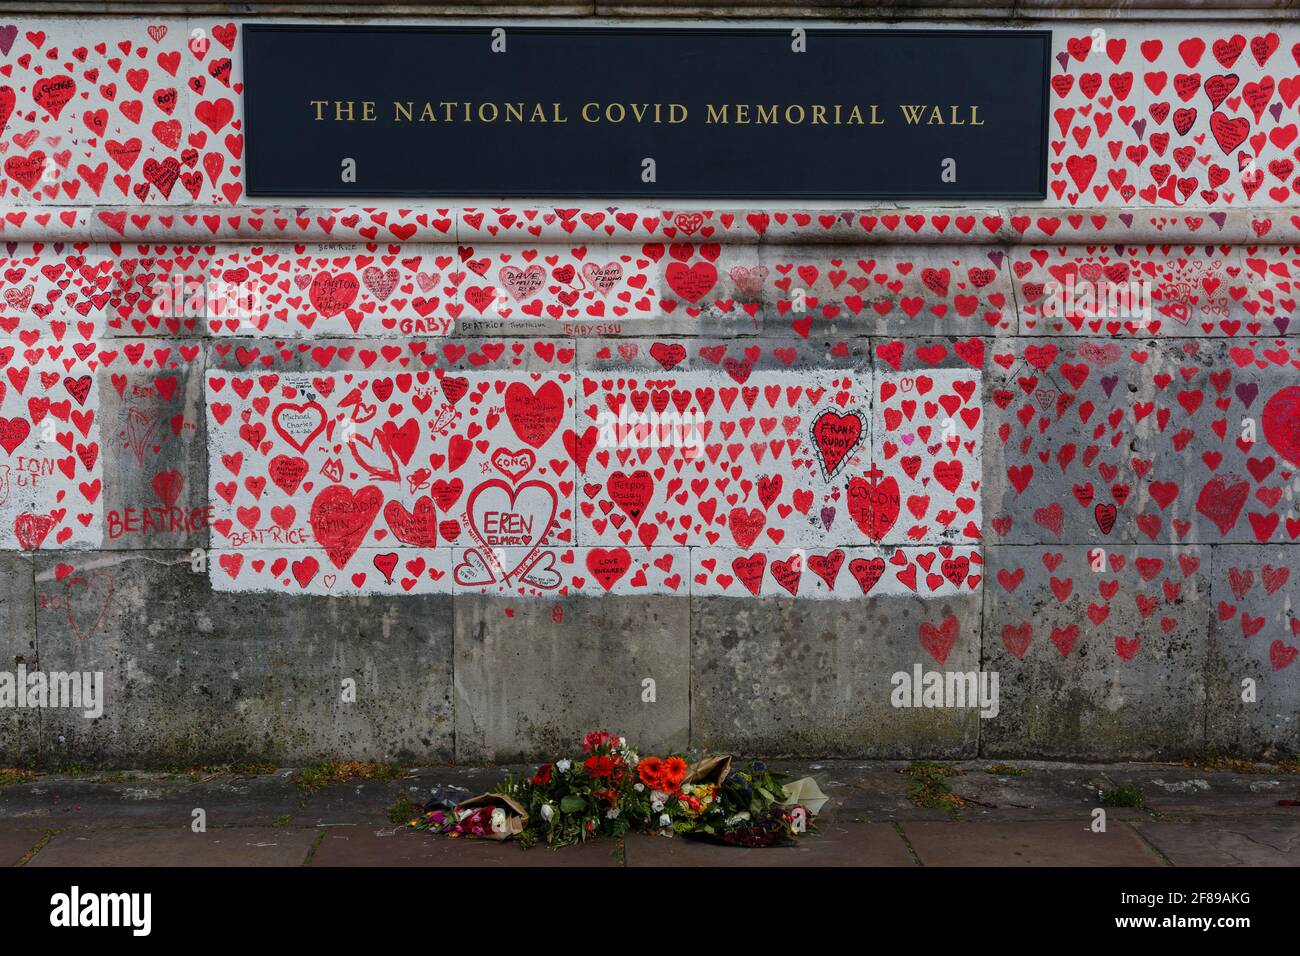 Red hearts painted on the National Covid Memorial Wall as a tribute to the British victims of the Coronavirus pandemic Stock Photo